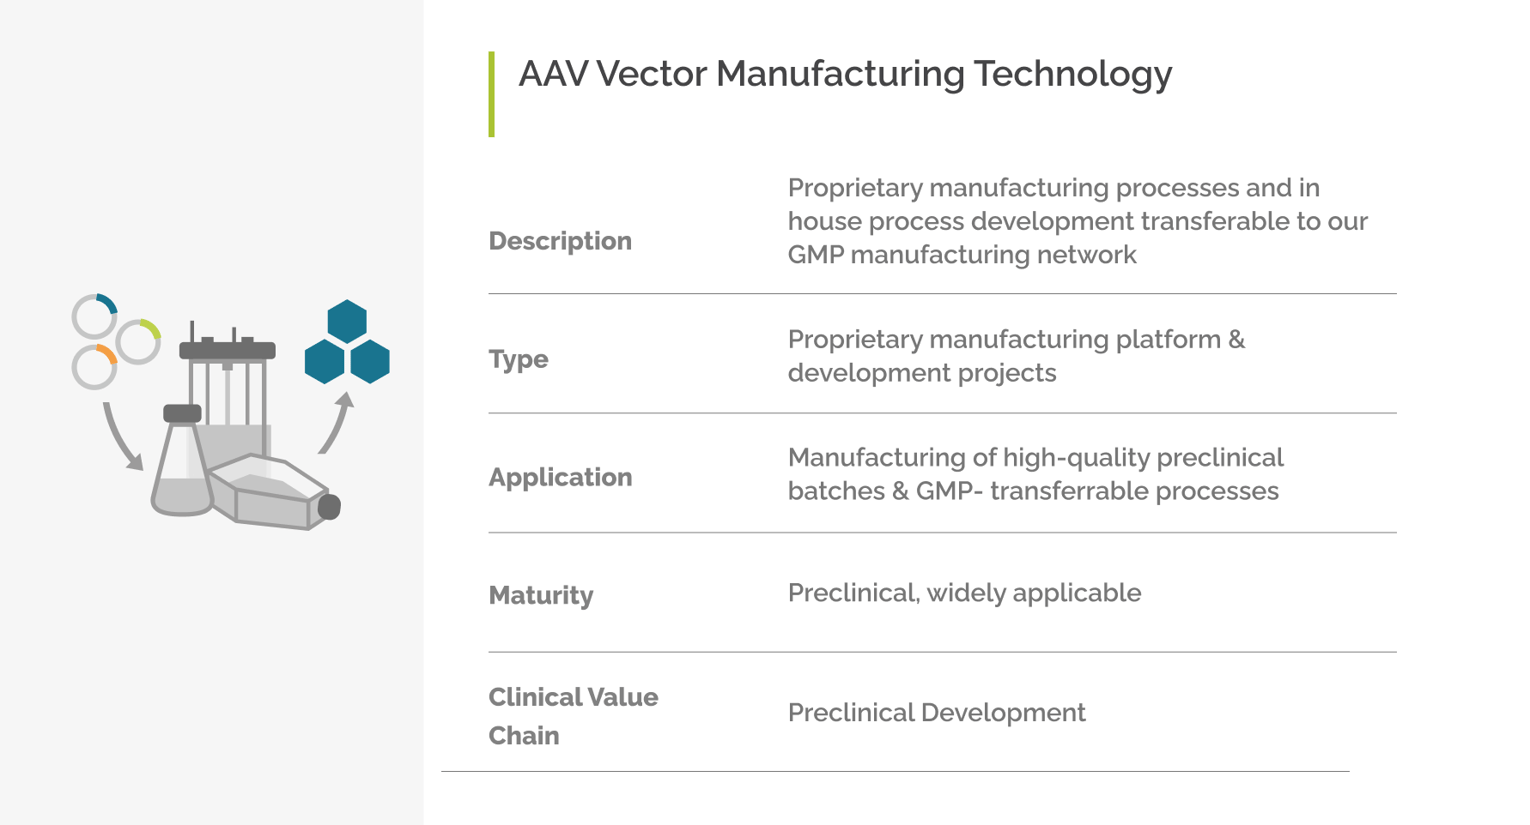 AAV Vector Manufacturing TechnologyTable